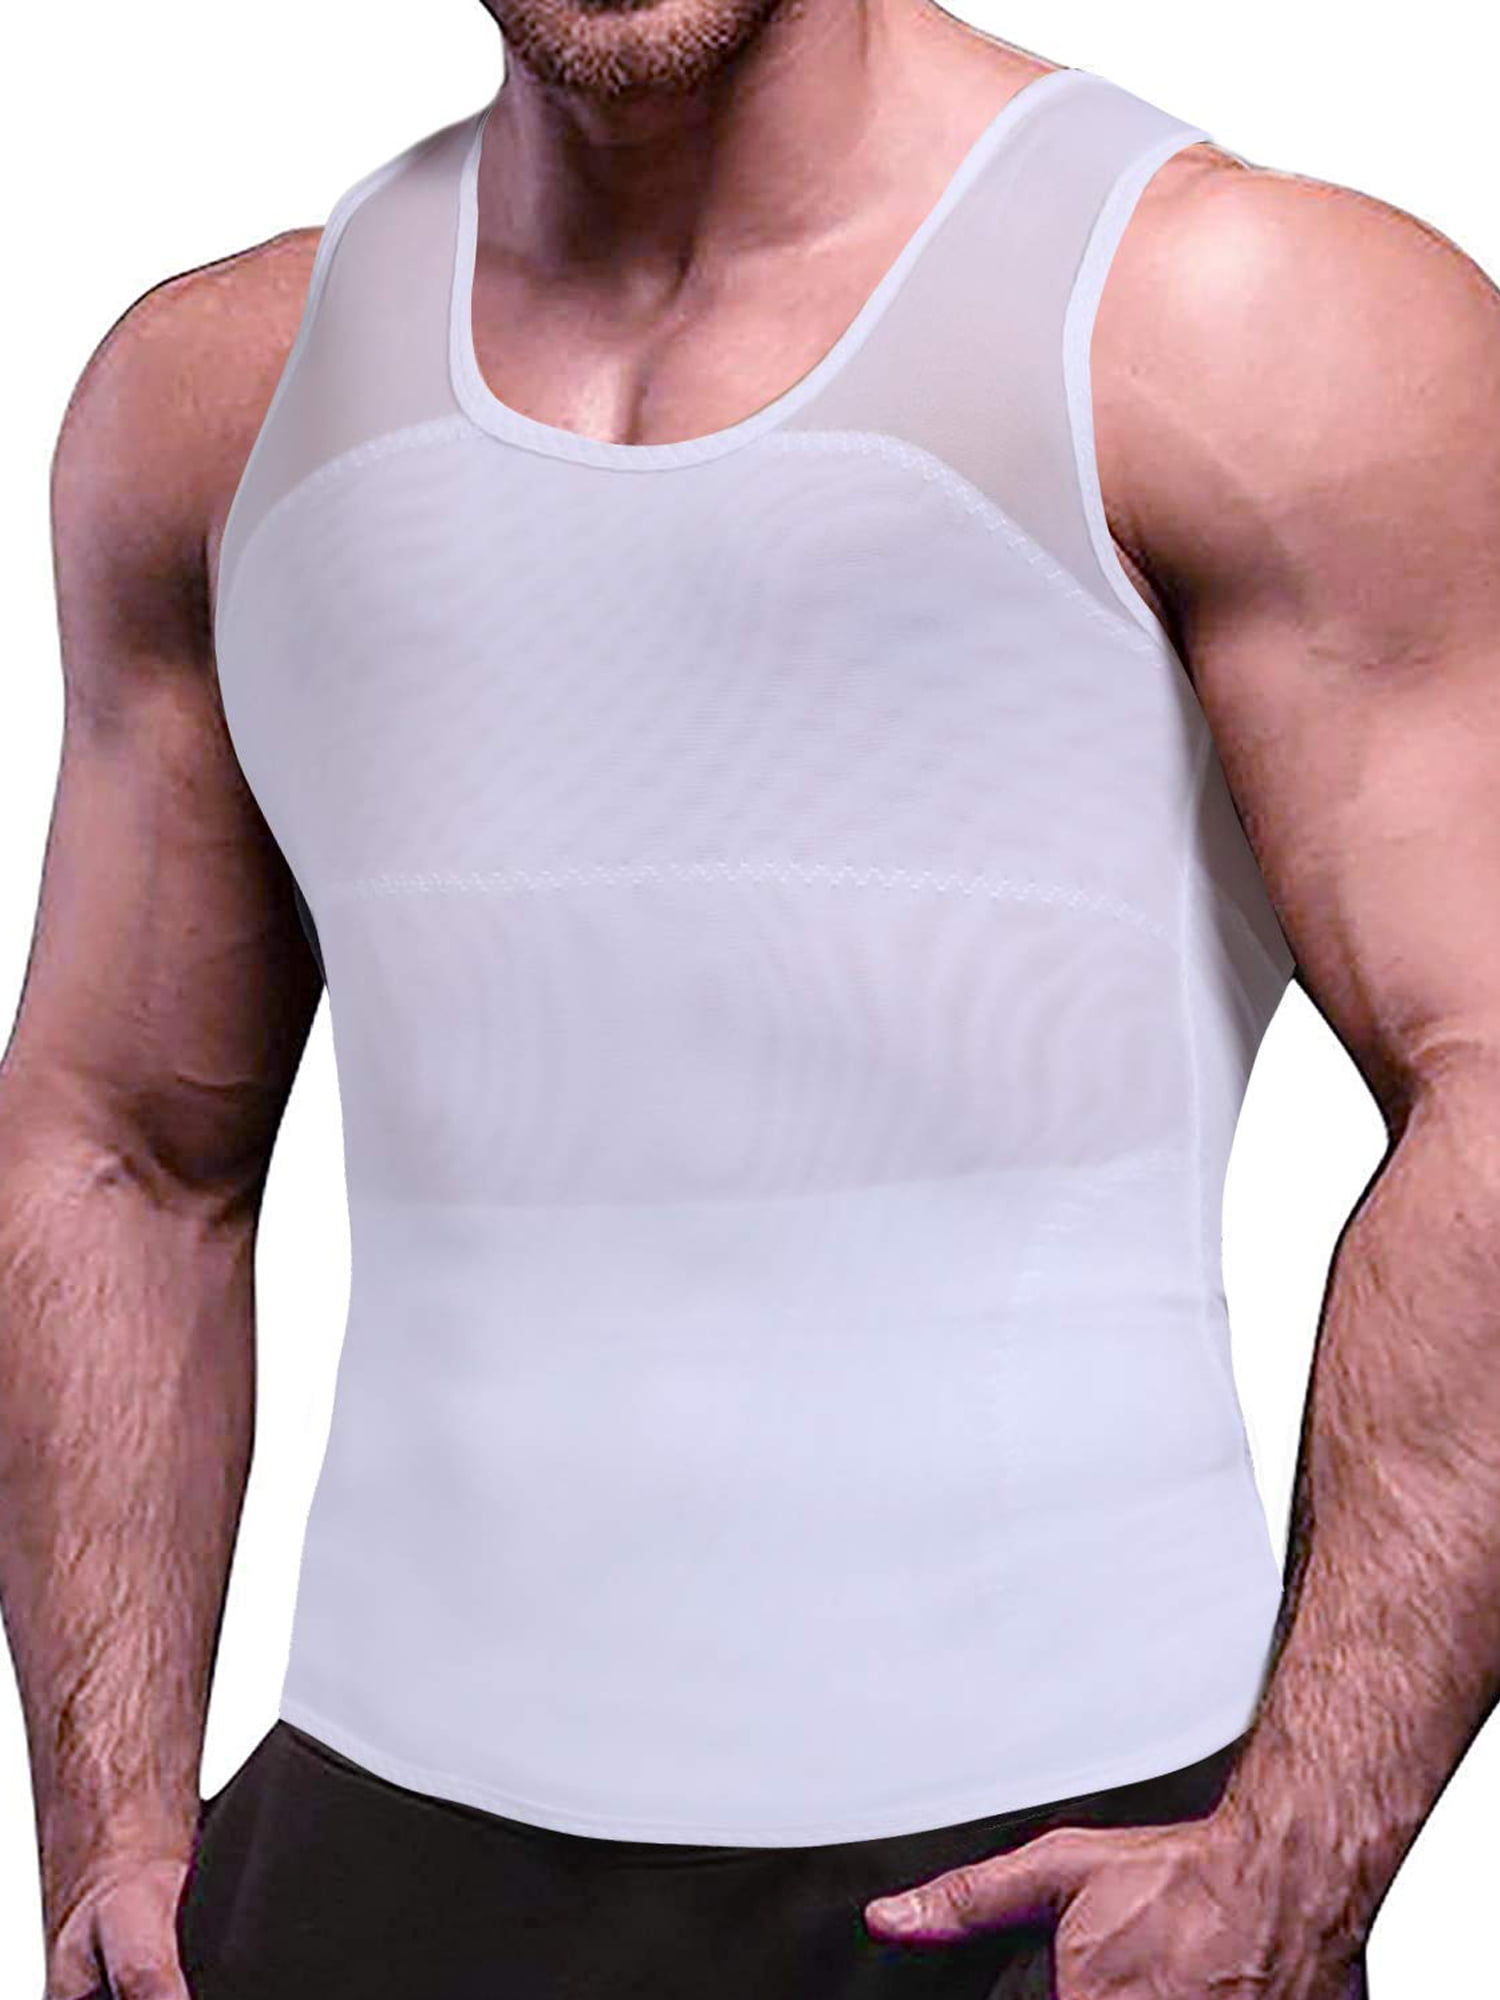 MISS MOLY Compression Shirts for Men Slimming Shirt Body Shaper Vest to Hide Gynecomastia Moobs Base Layer Tank Tops 